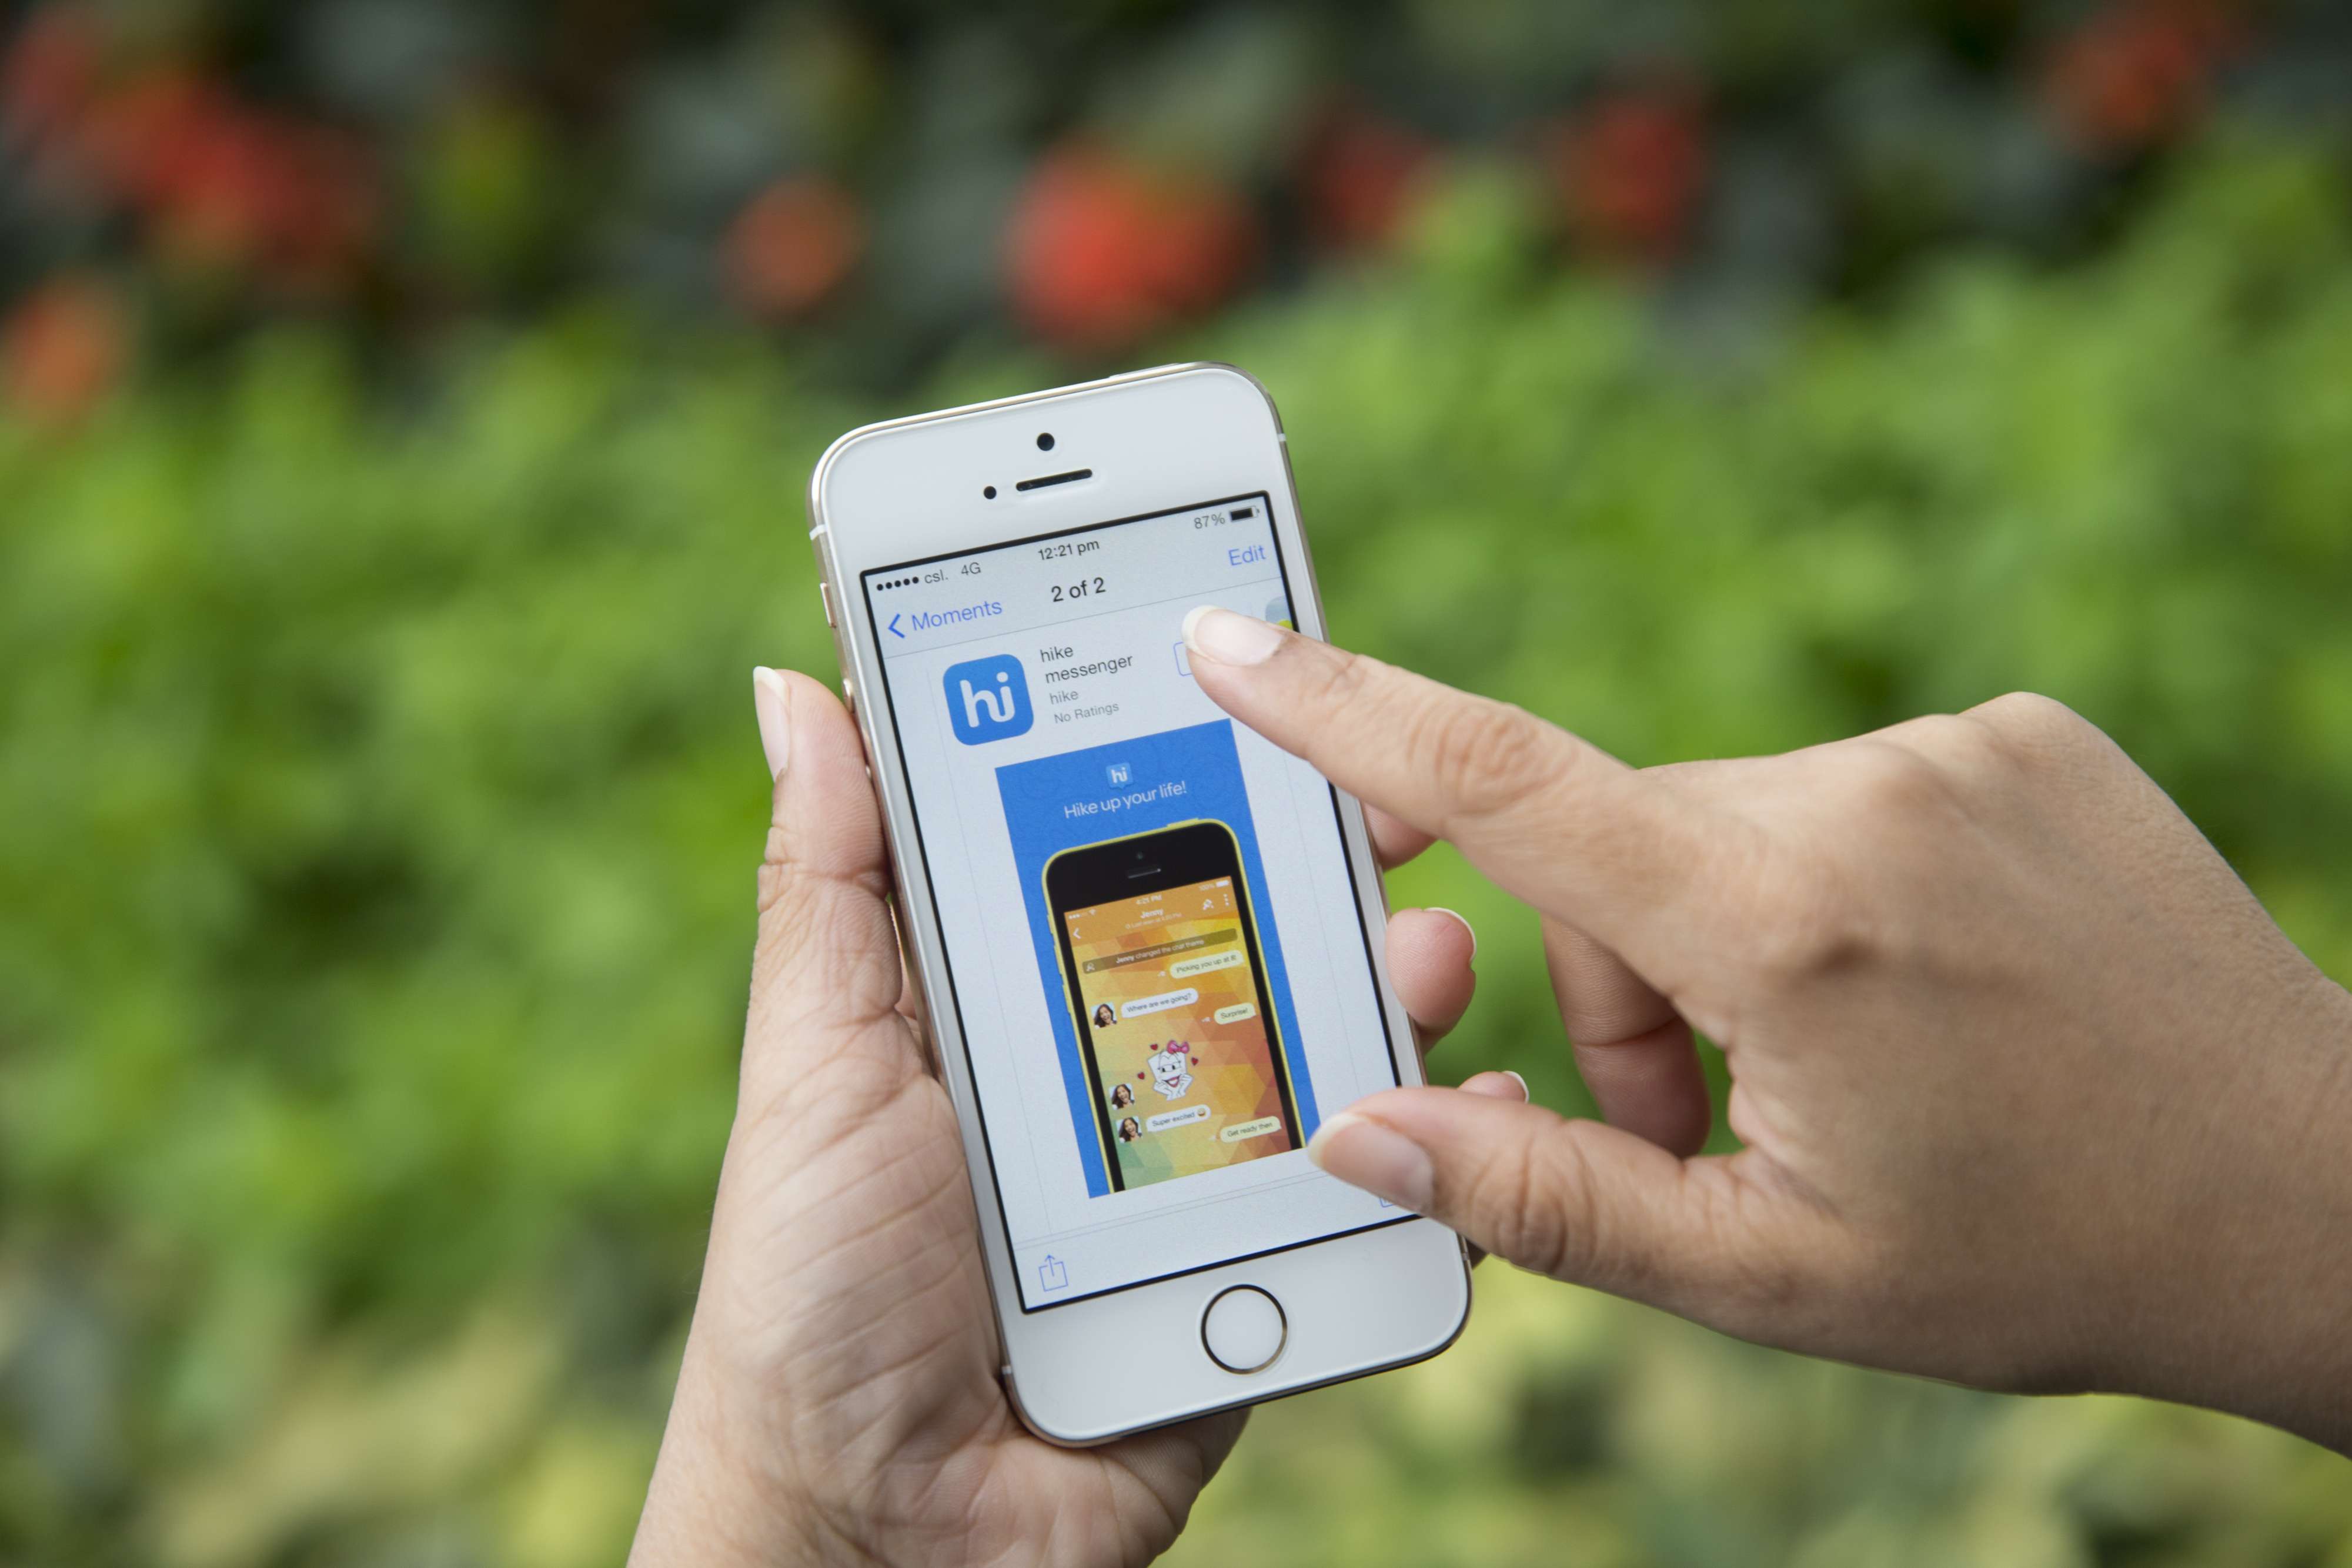 The download page for the Hike Messenger chat application – a competitor to WhatsApp. Photo: Bloomberg